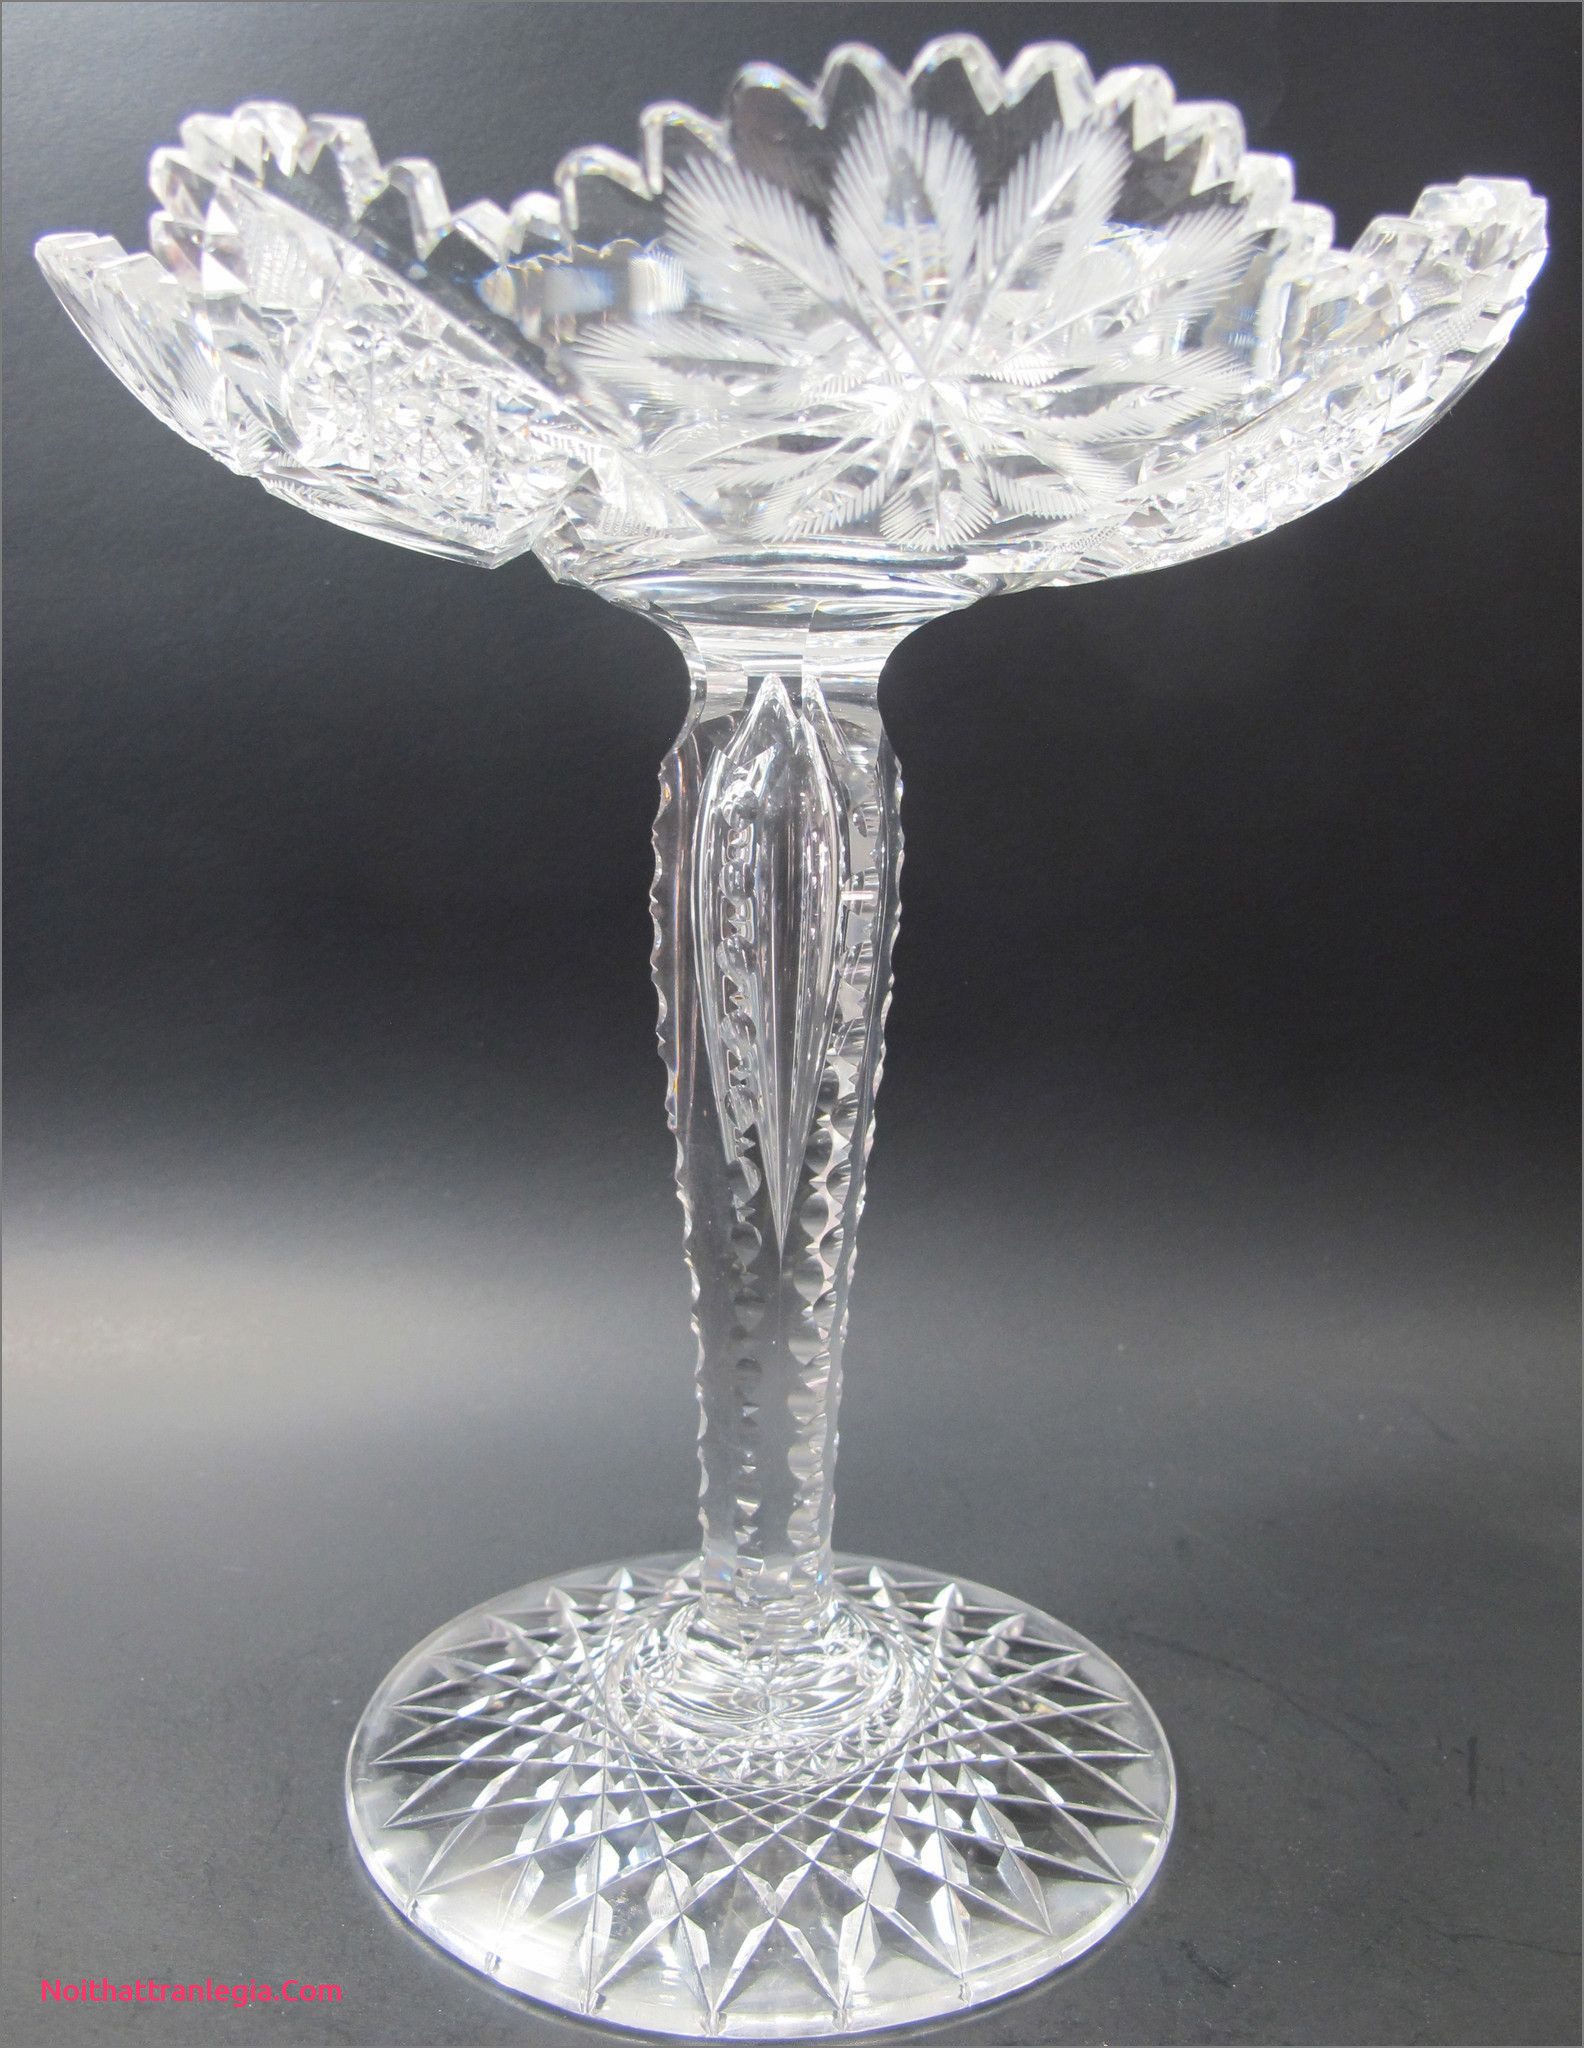 28 Trendy Bohemia Crystal Flower Vase 2024 free download bohemia crystal flower vase of 20 cut glass antique vase noithattranlegia vases design within fering this abp antique cut glass pote from the american brilliant period 1886 1916 9 5